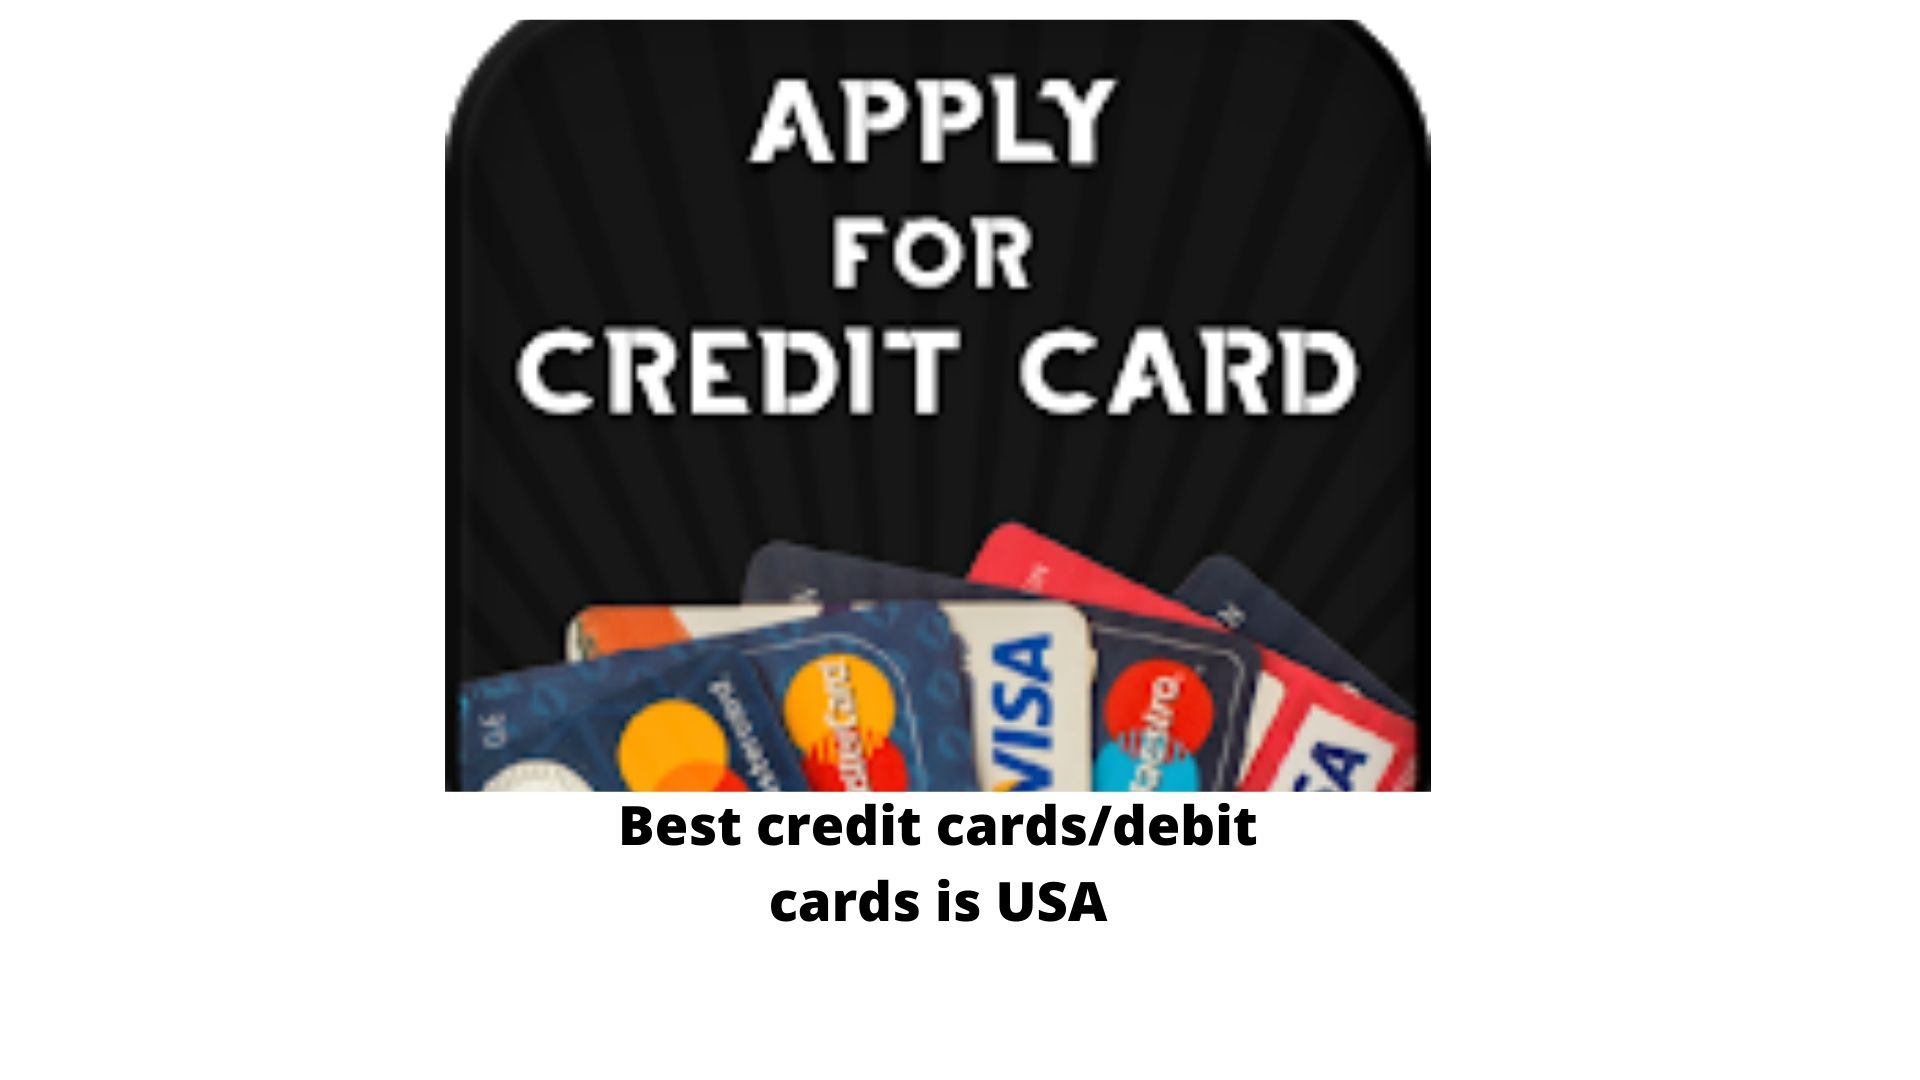 15 Best Virtual cards/debit cards in USA 2021